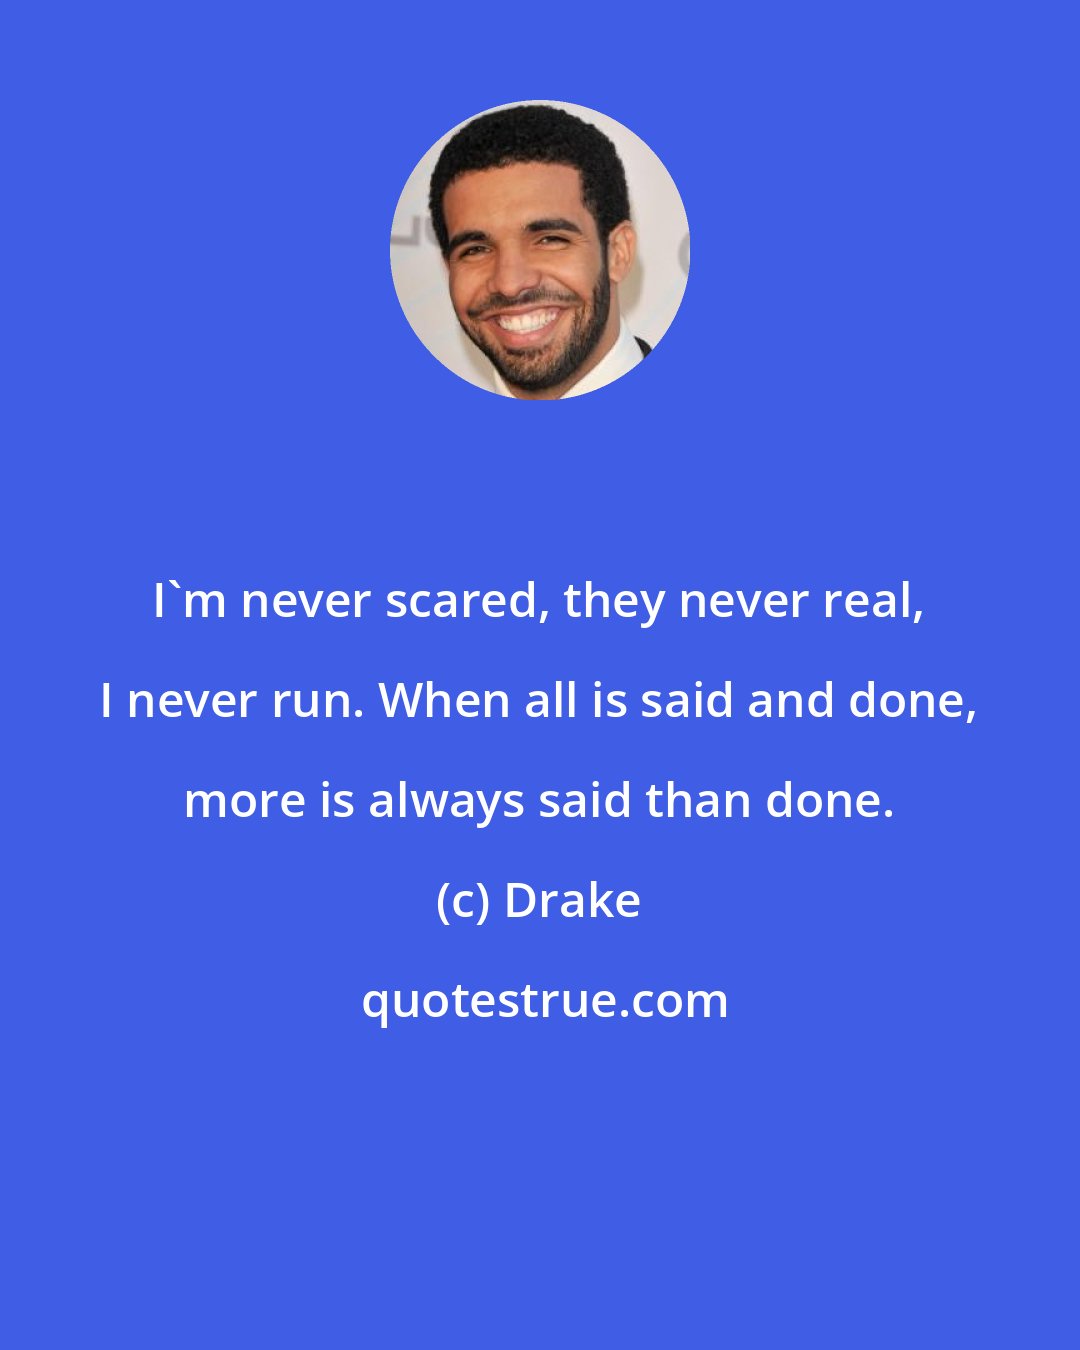 Drake: I'm never scared, they never real, I never run. When all is said and done, more is always said than done.